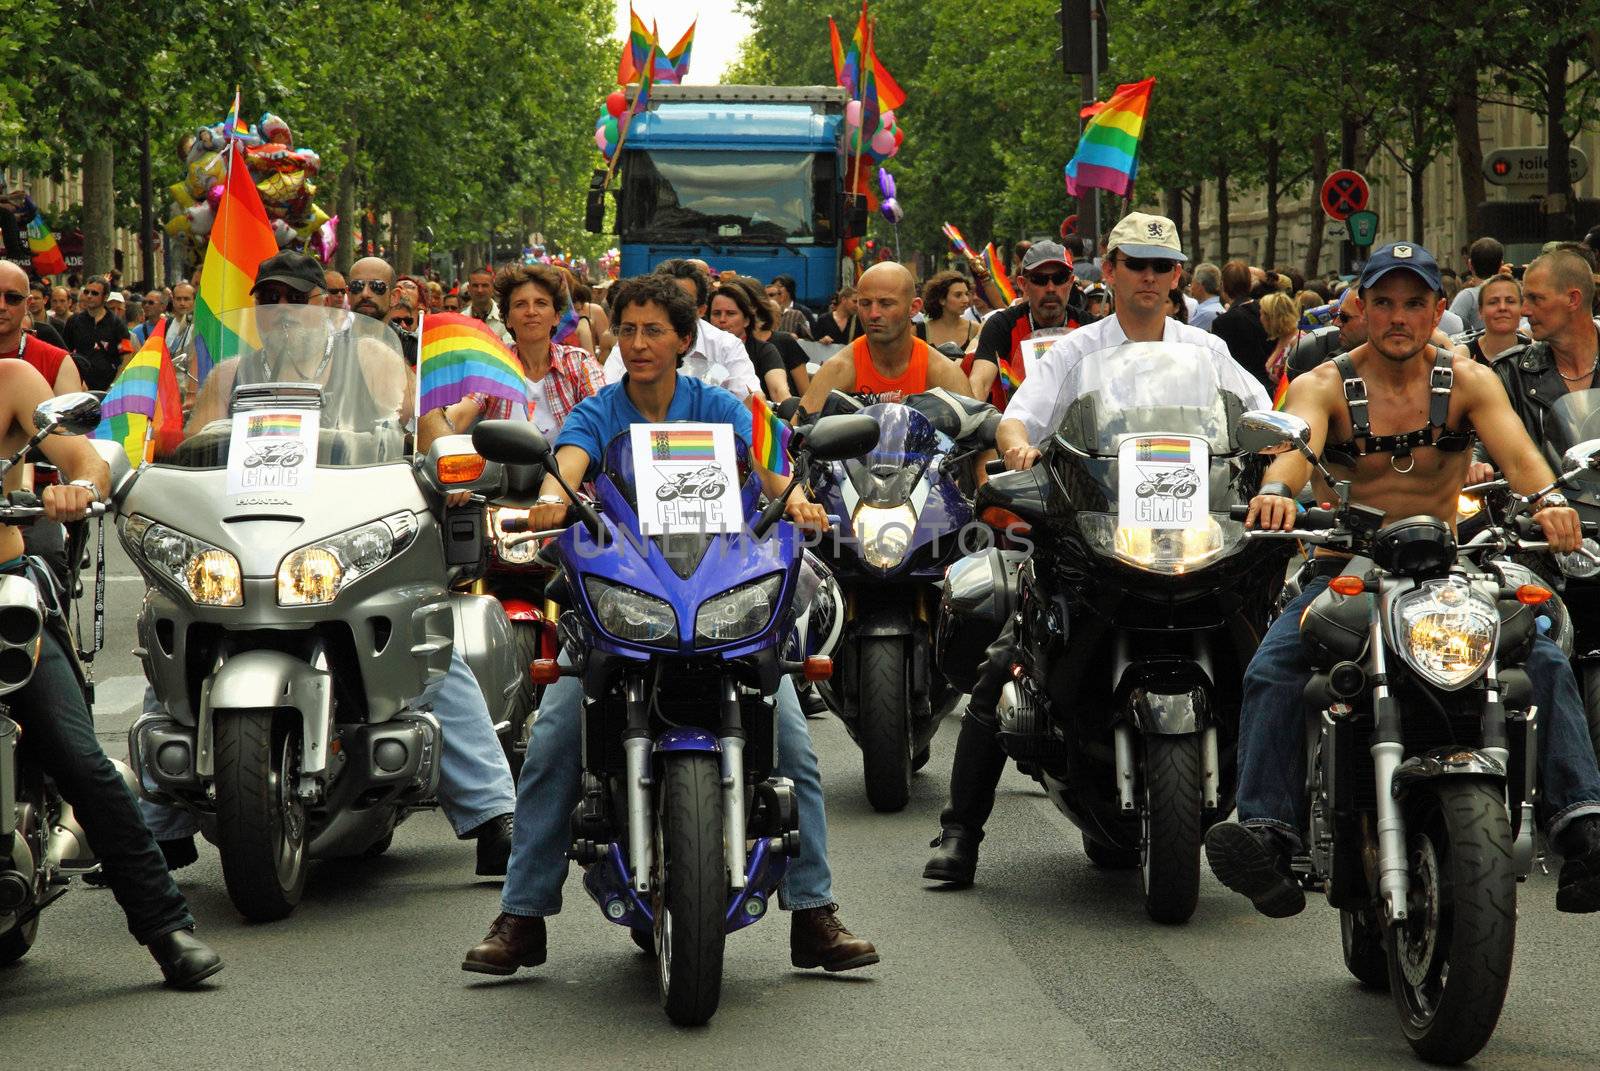 Motorcycle Vanguard for Parisian Gays by pjhpix